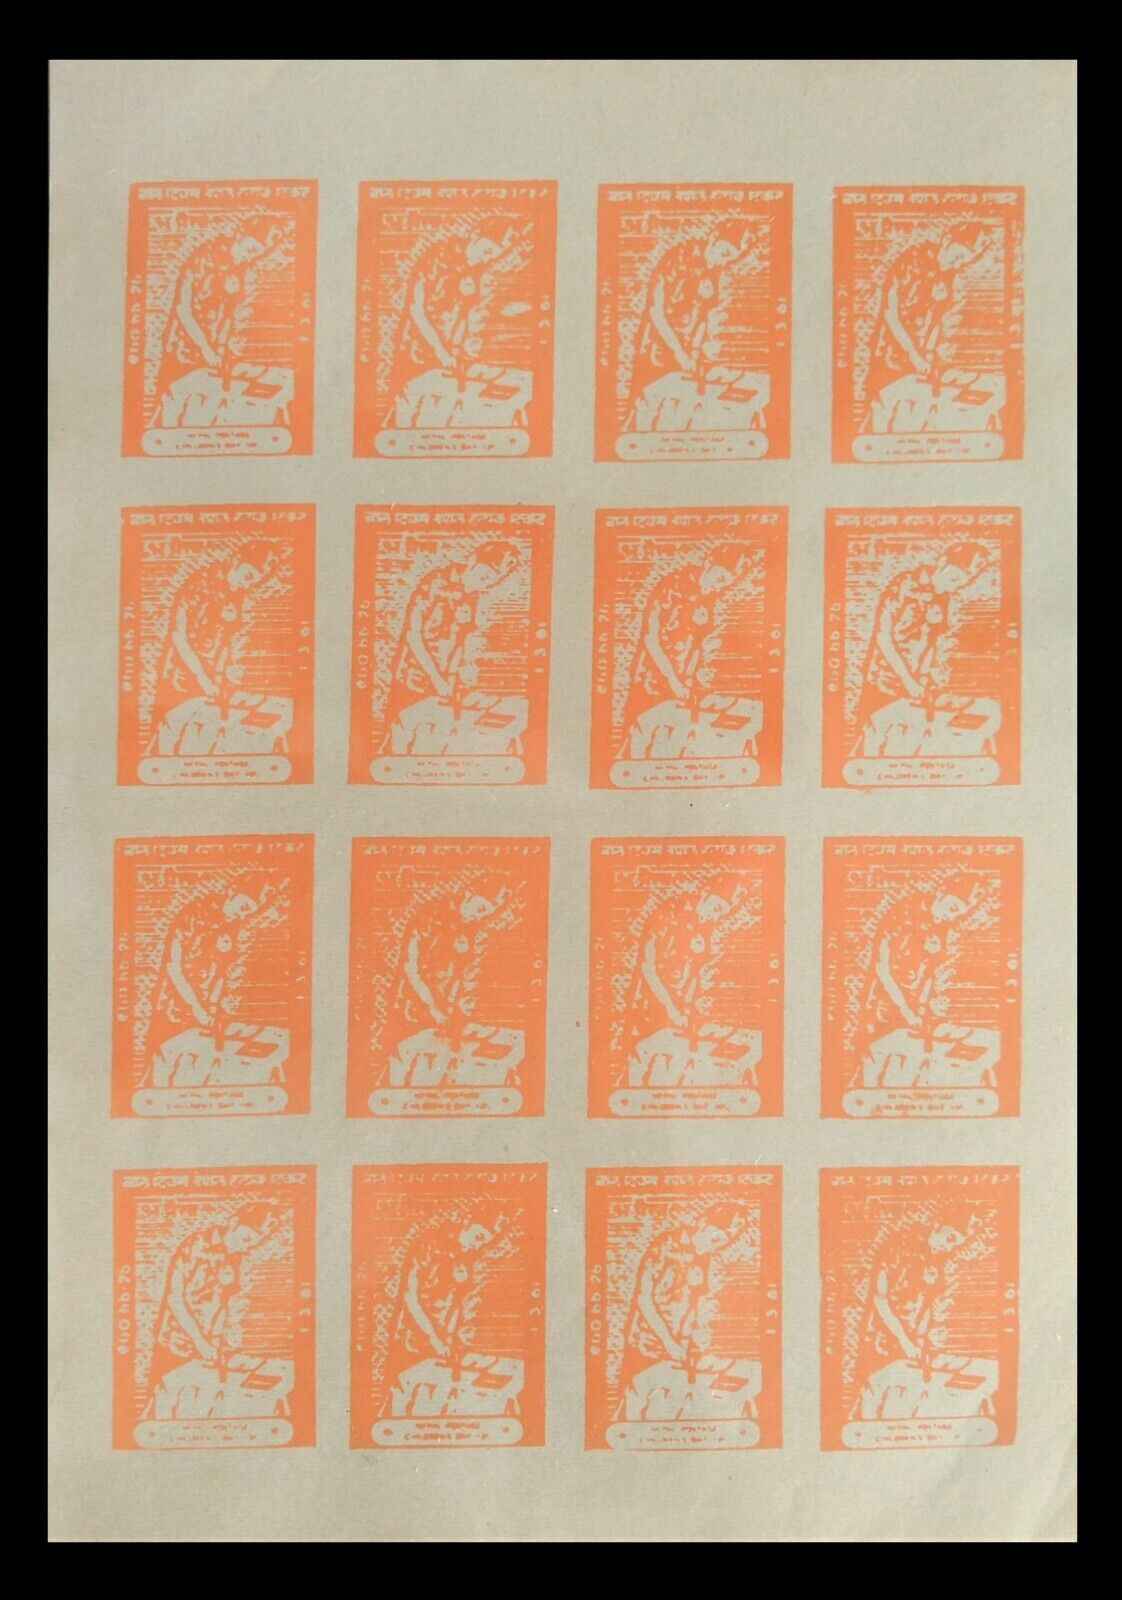 130.NEPAL1961 IMPERF STAMP SHEET CHILDRENS DAY , FORGERY, REPLICA .MNH